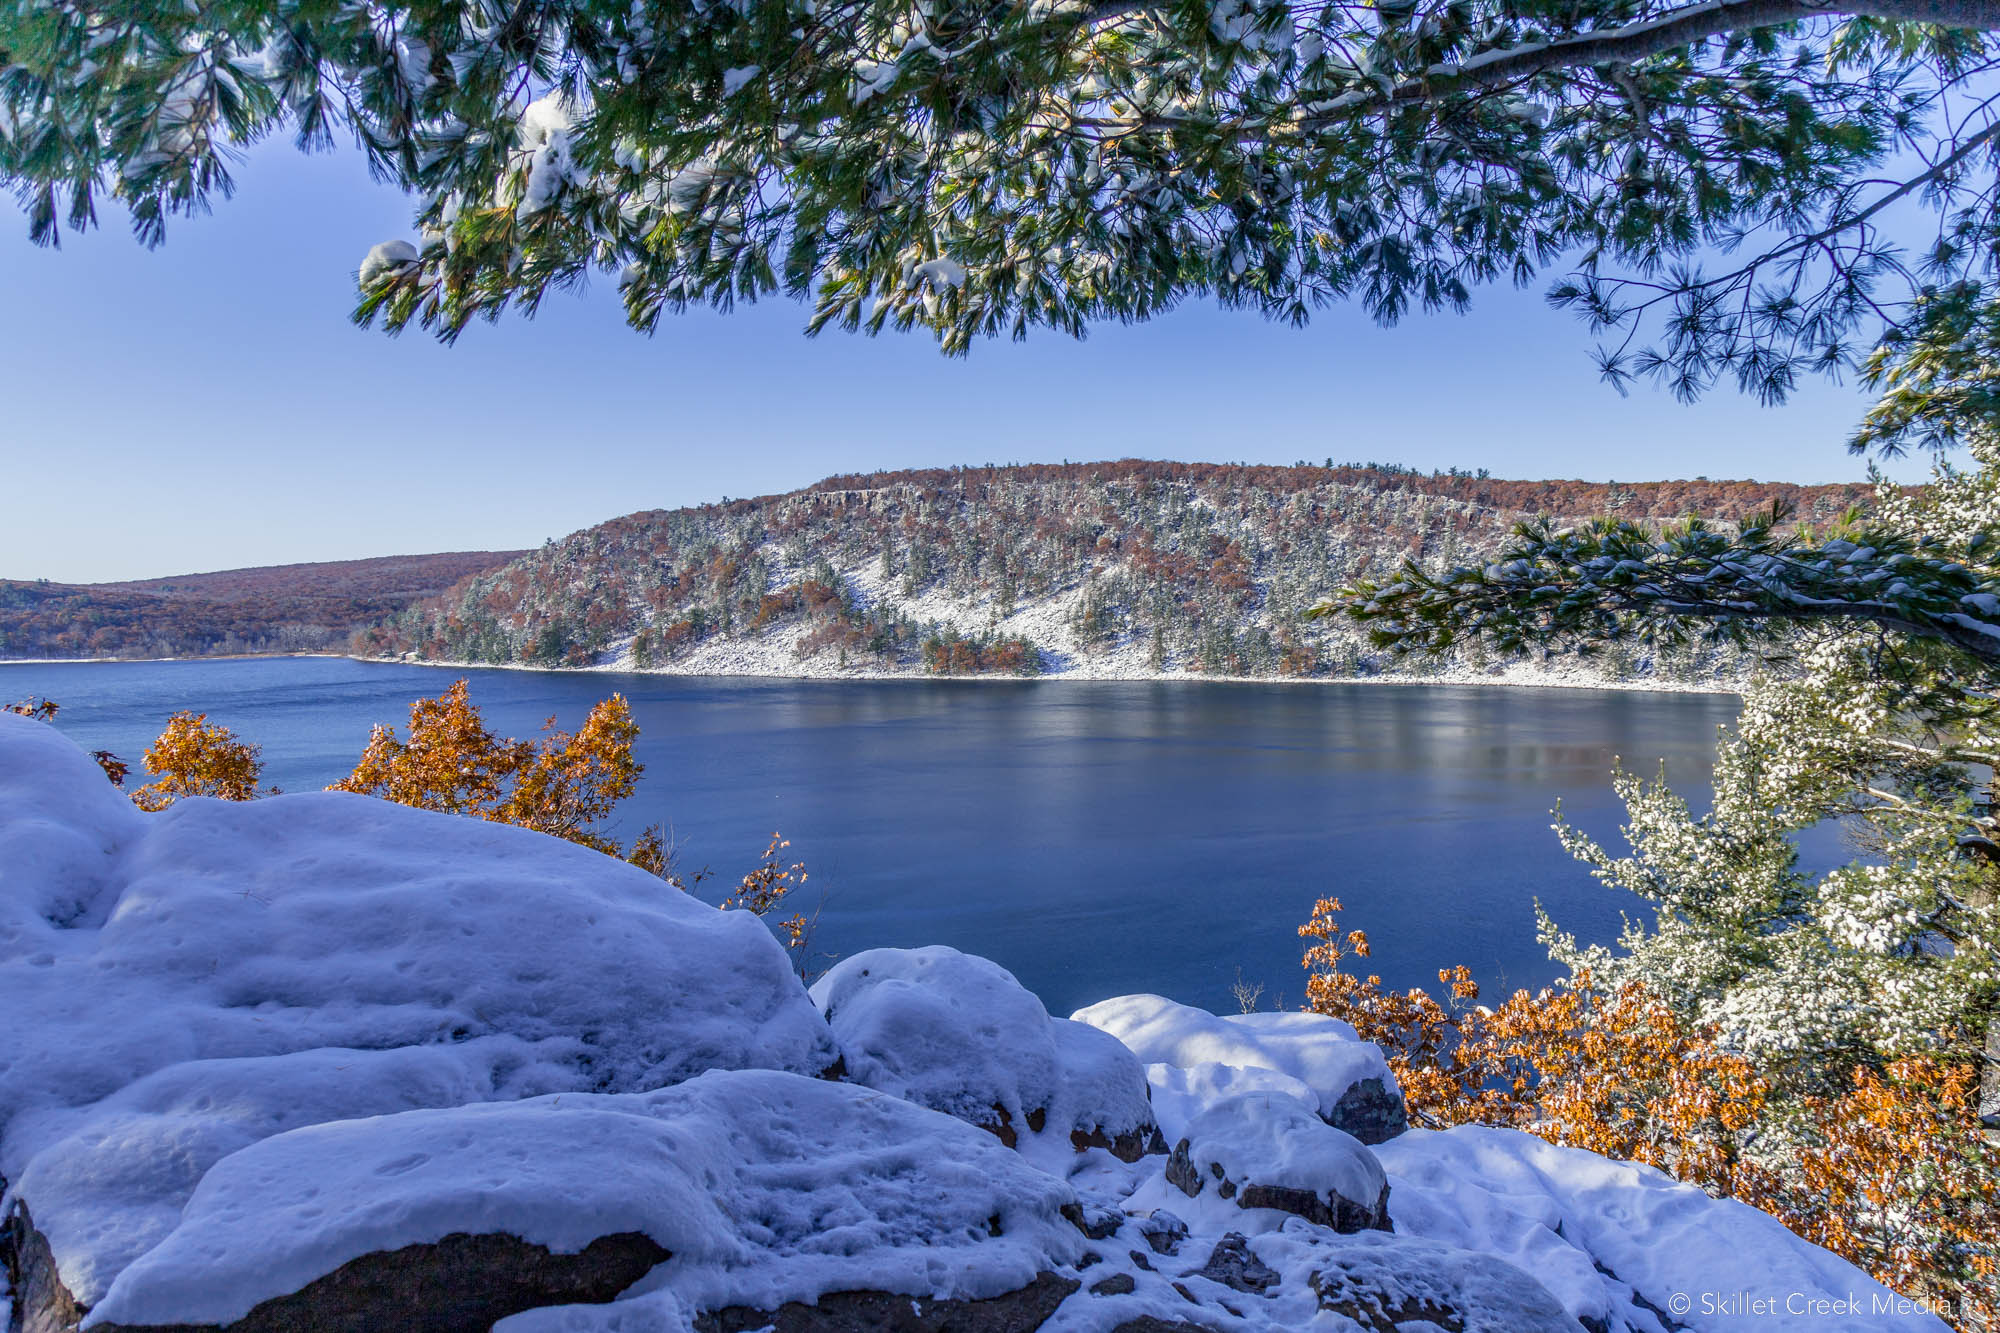 A lake and snowy landscape in Sauk County, Wisconsin